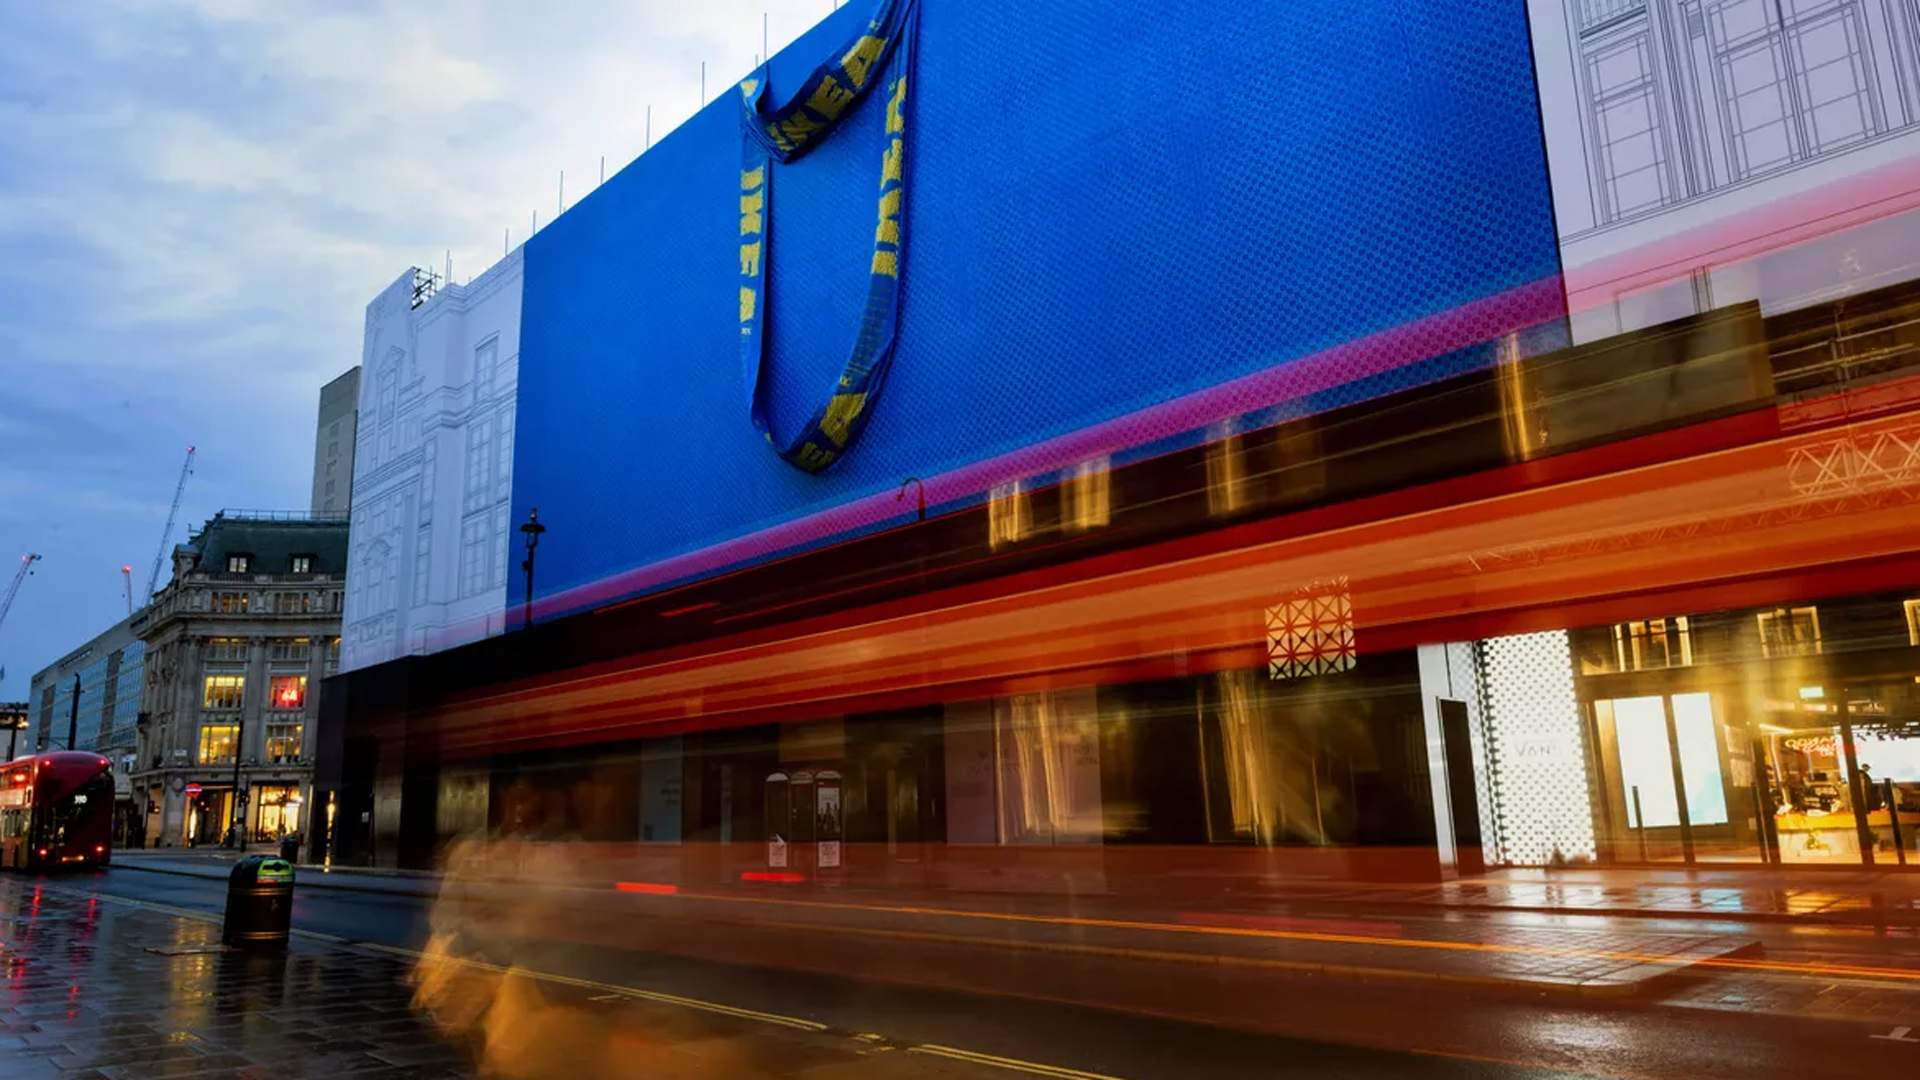 IKEA giant blue bag on building in Oxford Street